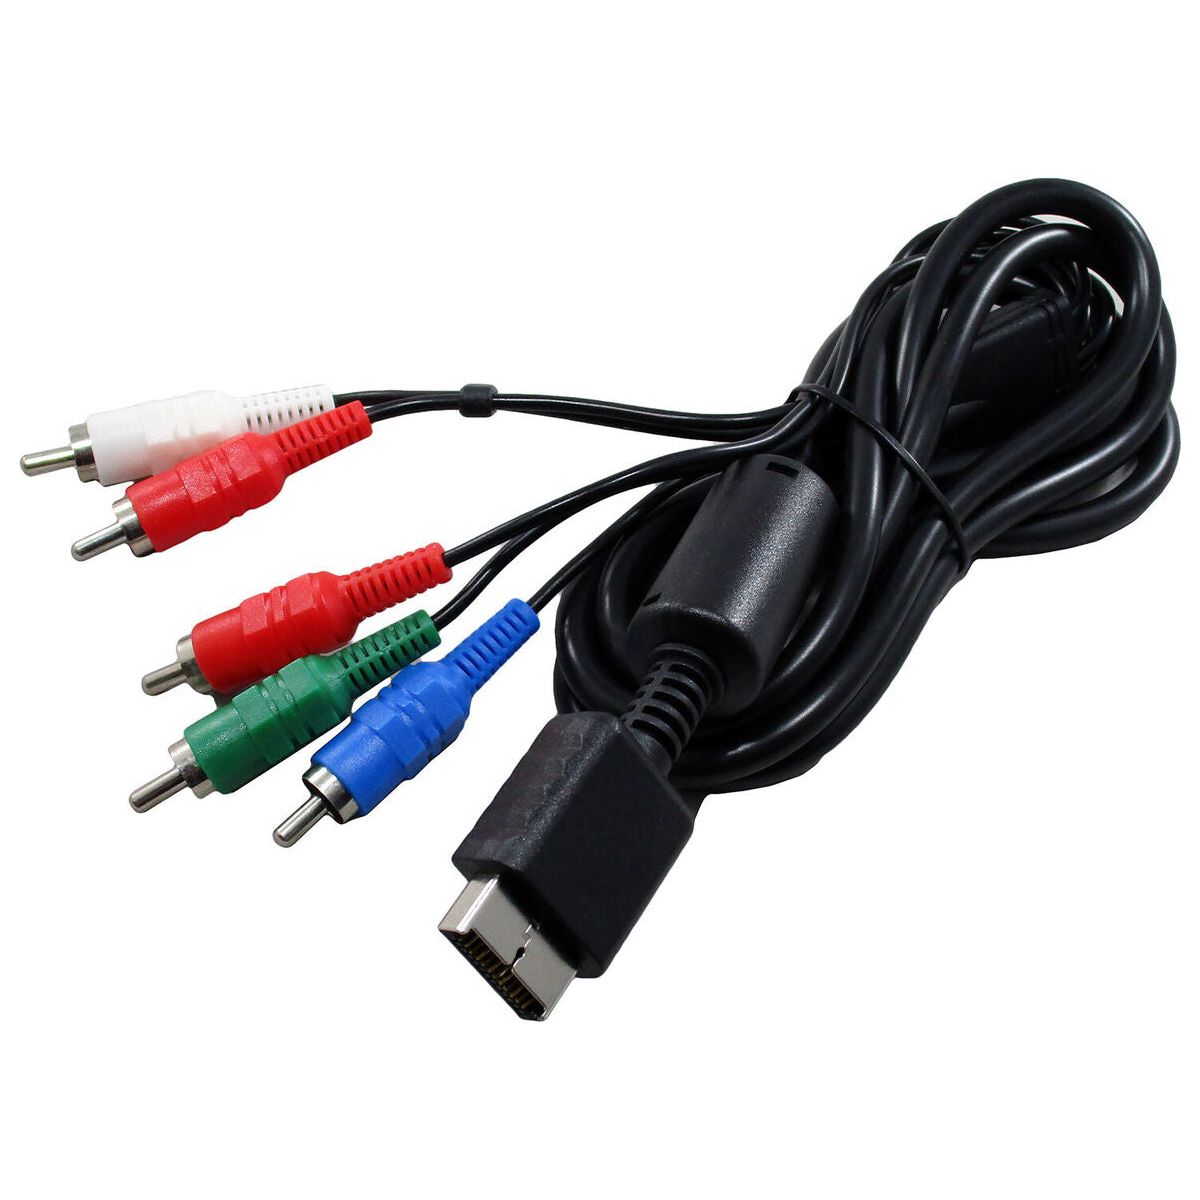 PS2/PS3 Component Video Cable (Third Party)